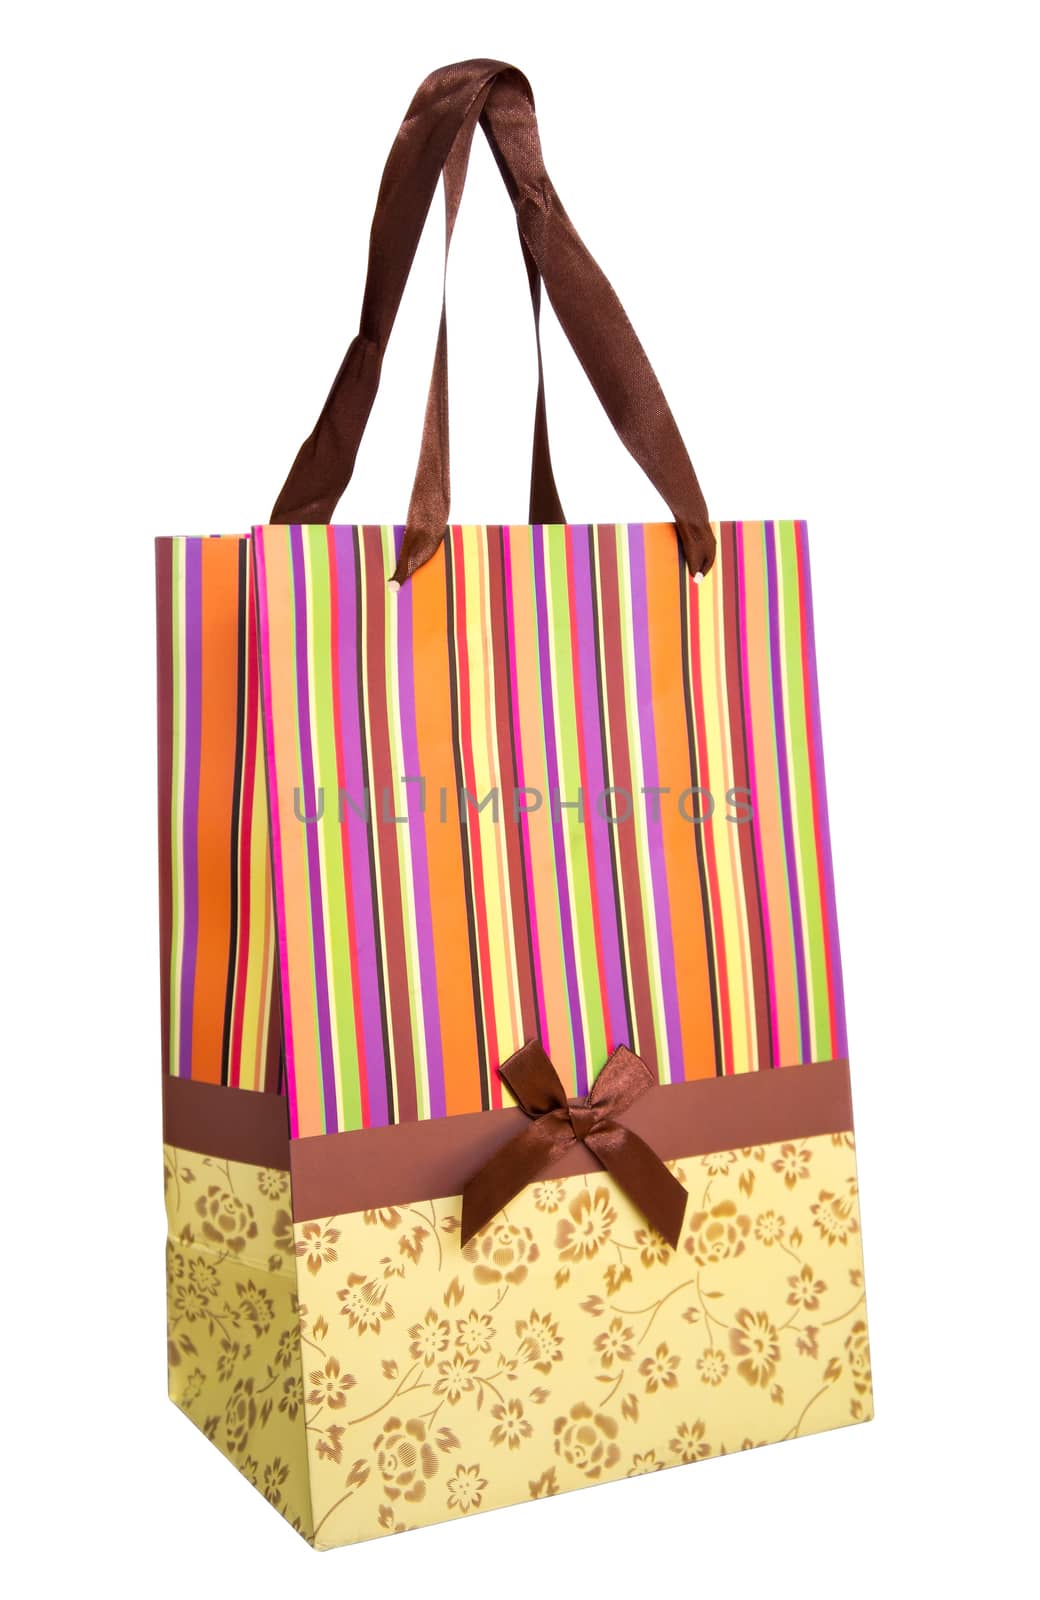 Blank shopping bag isolated on white. Clipping path included.